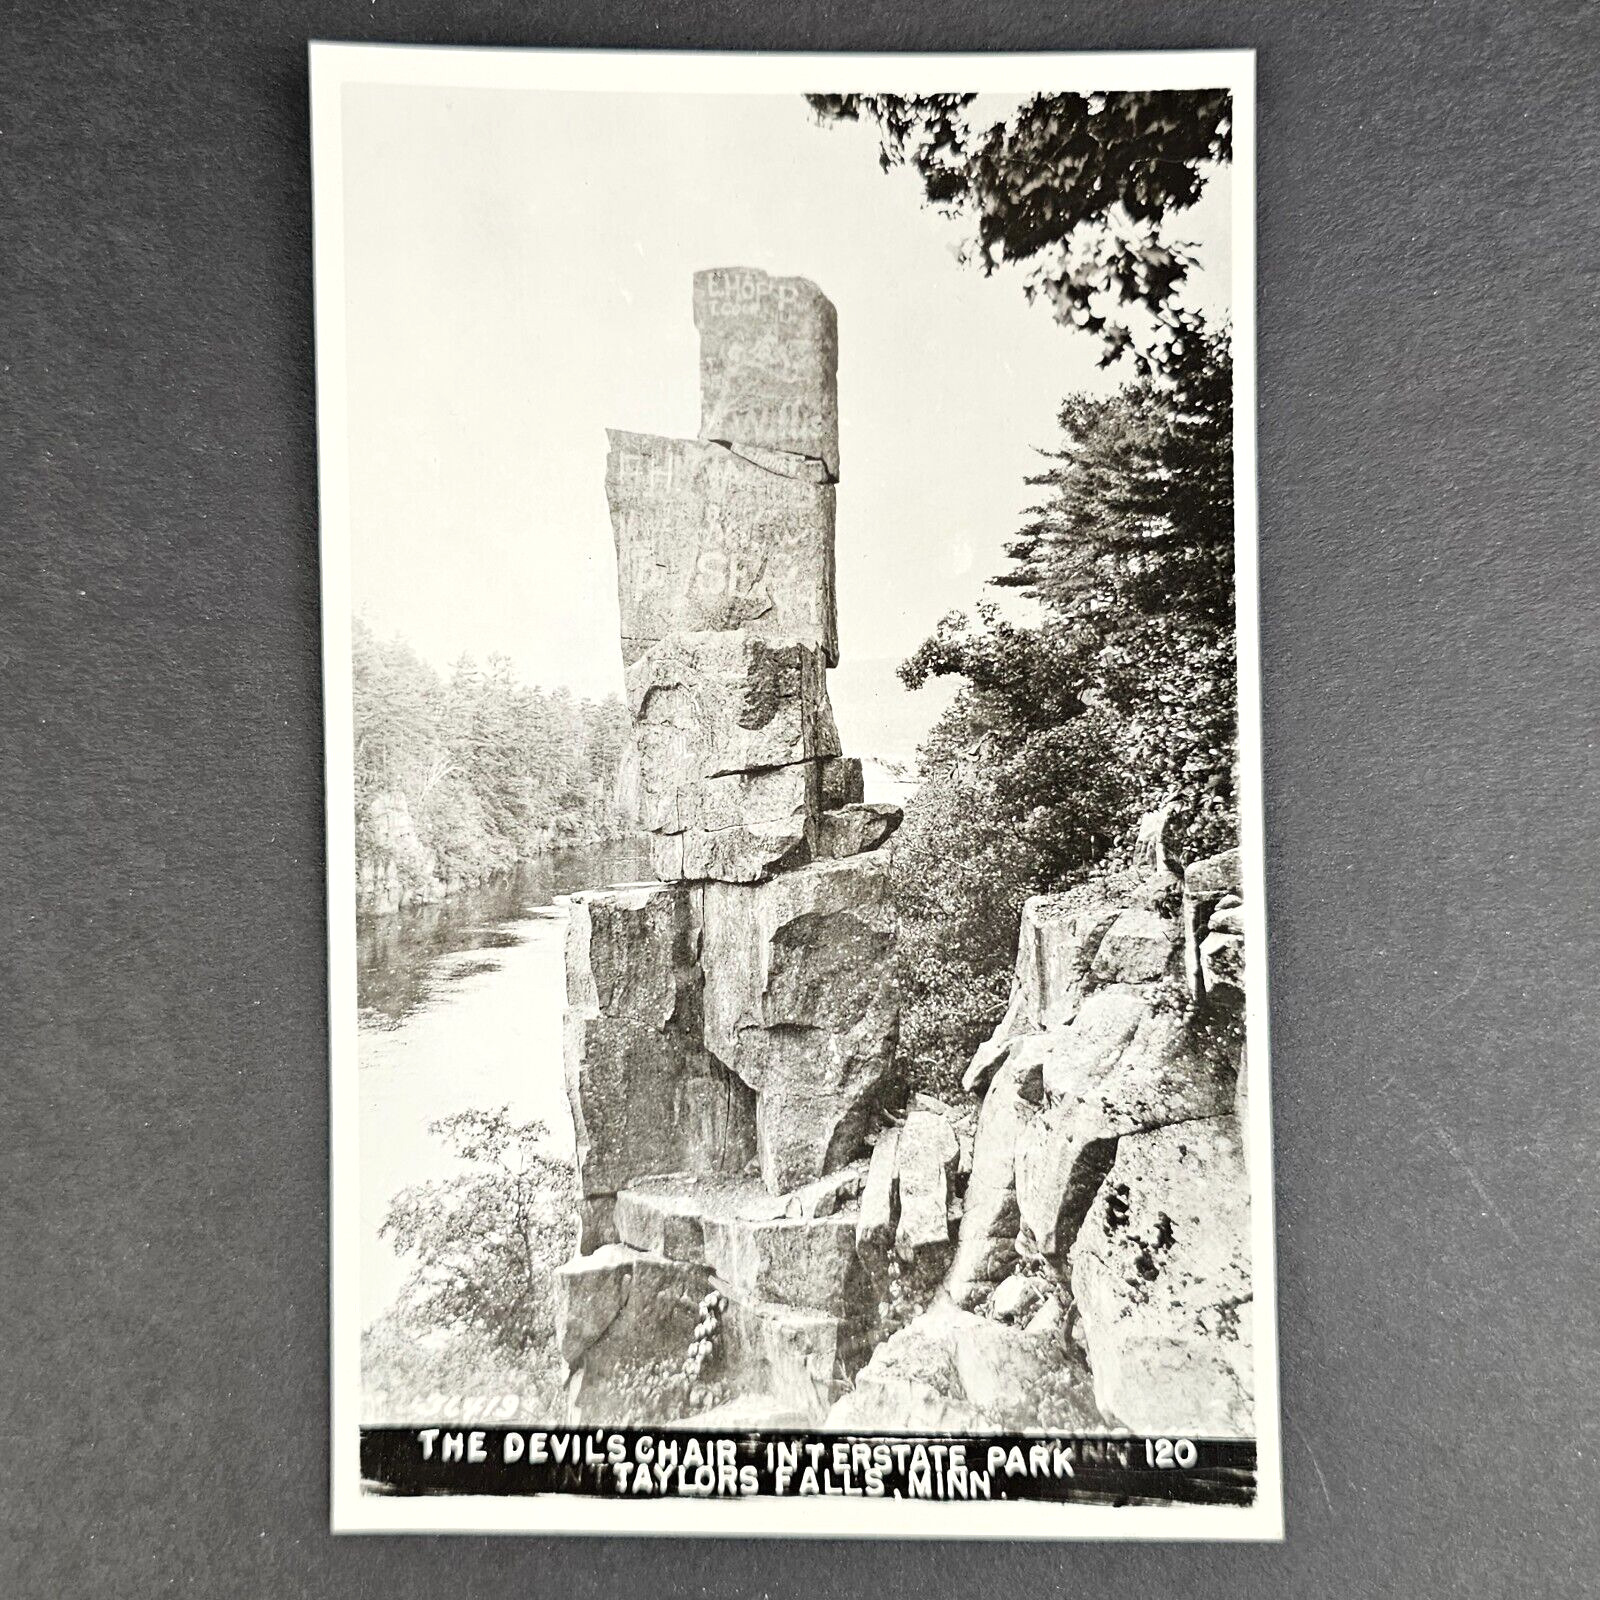 Vintage RPPC Post Card The Devil's Chair Interstate Park 120 Taylor Falls, MN